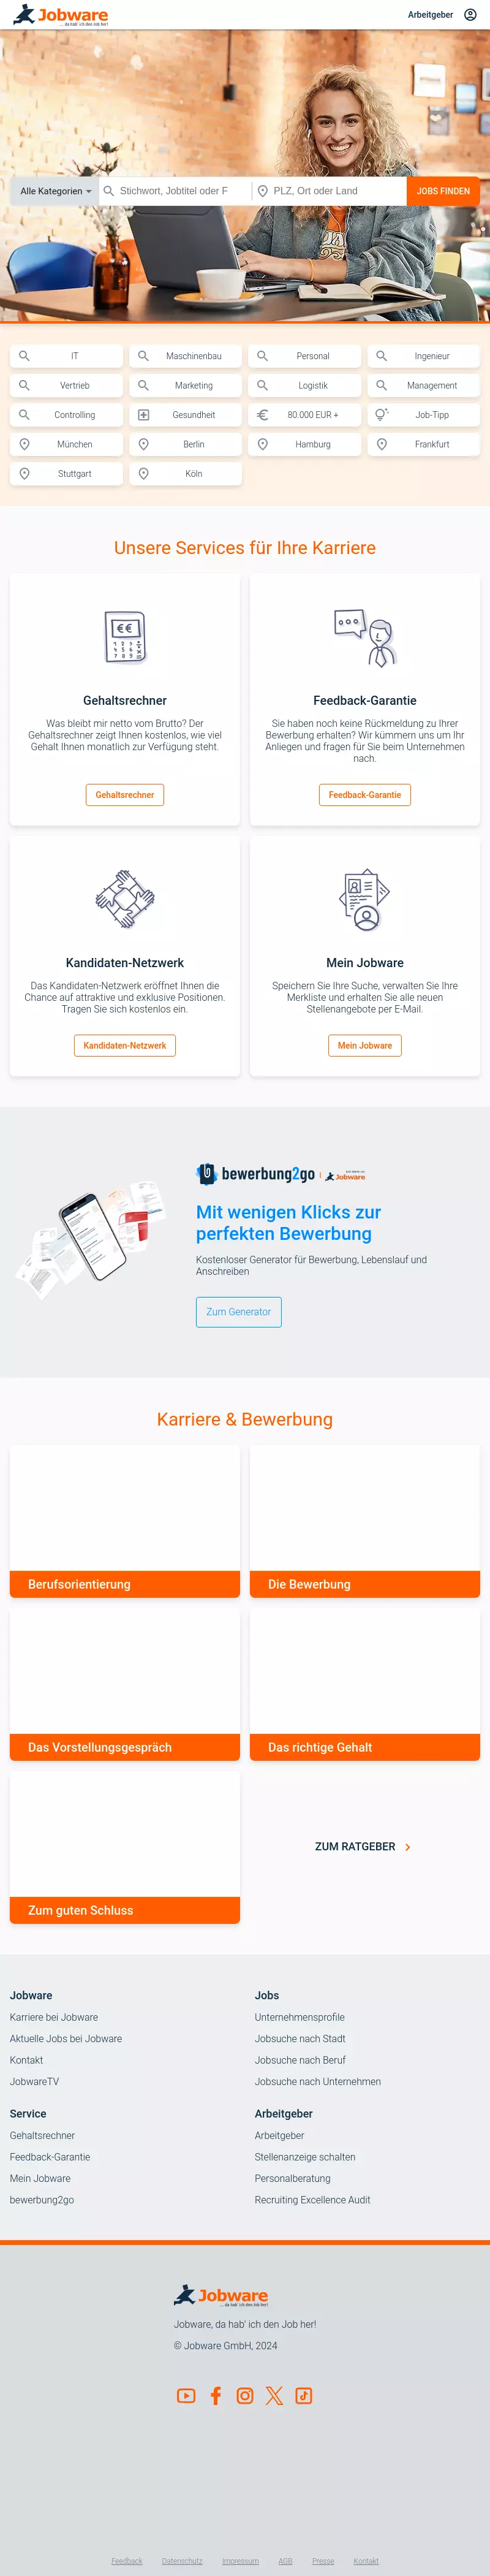 Android App-Entwickler:in